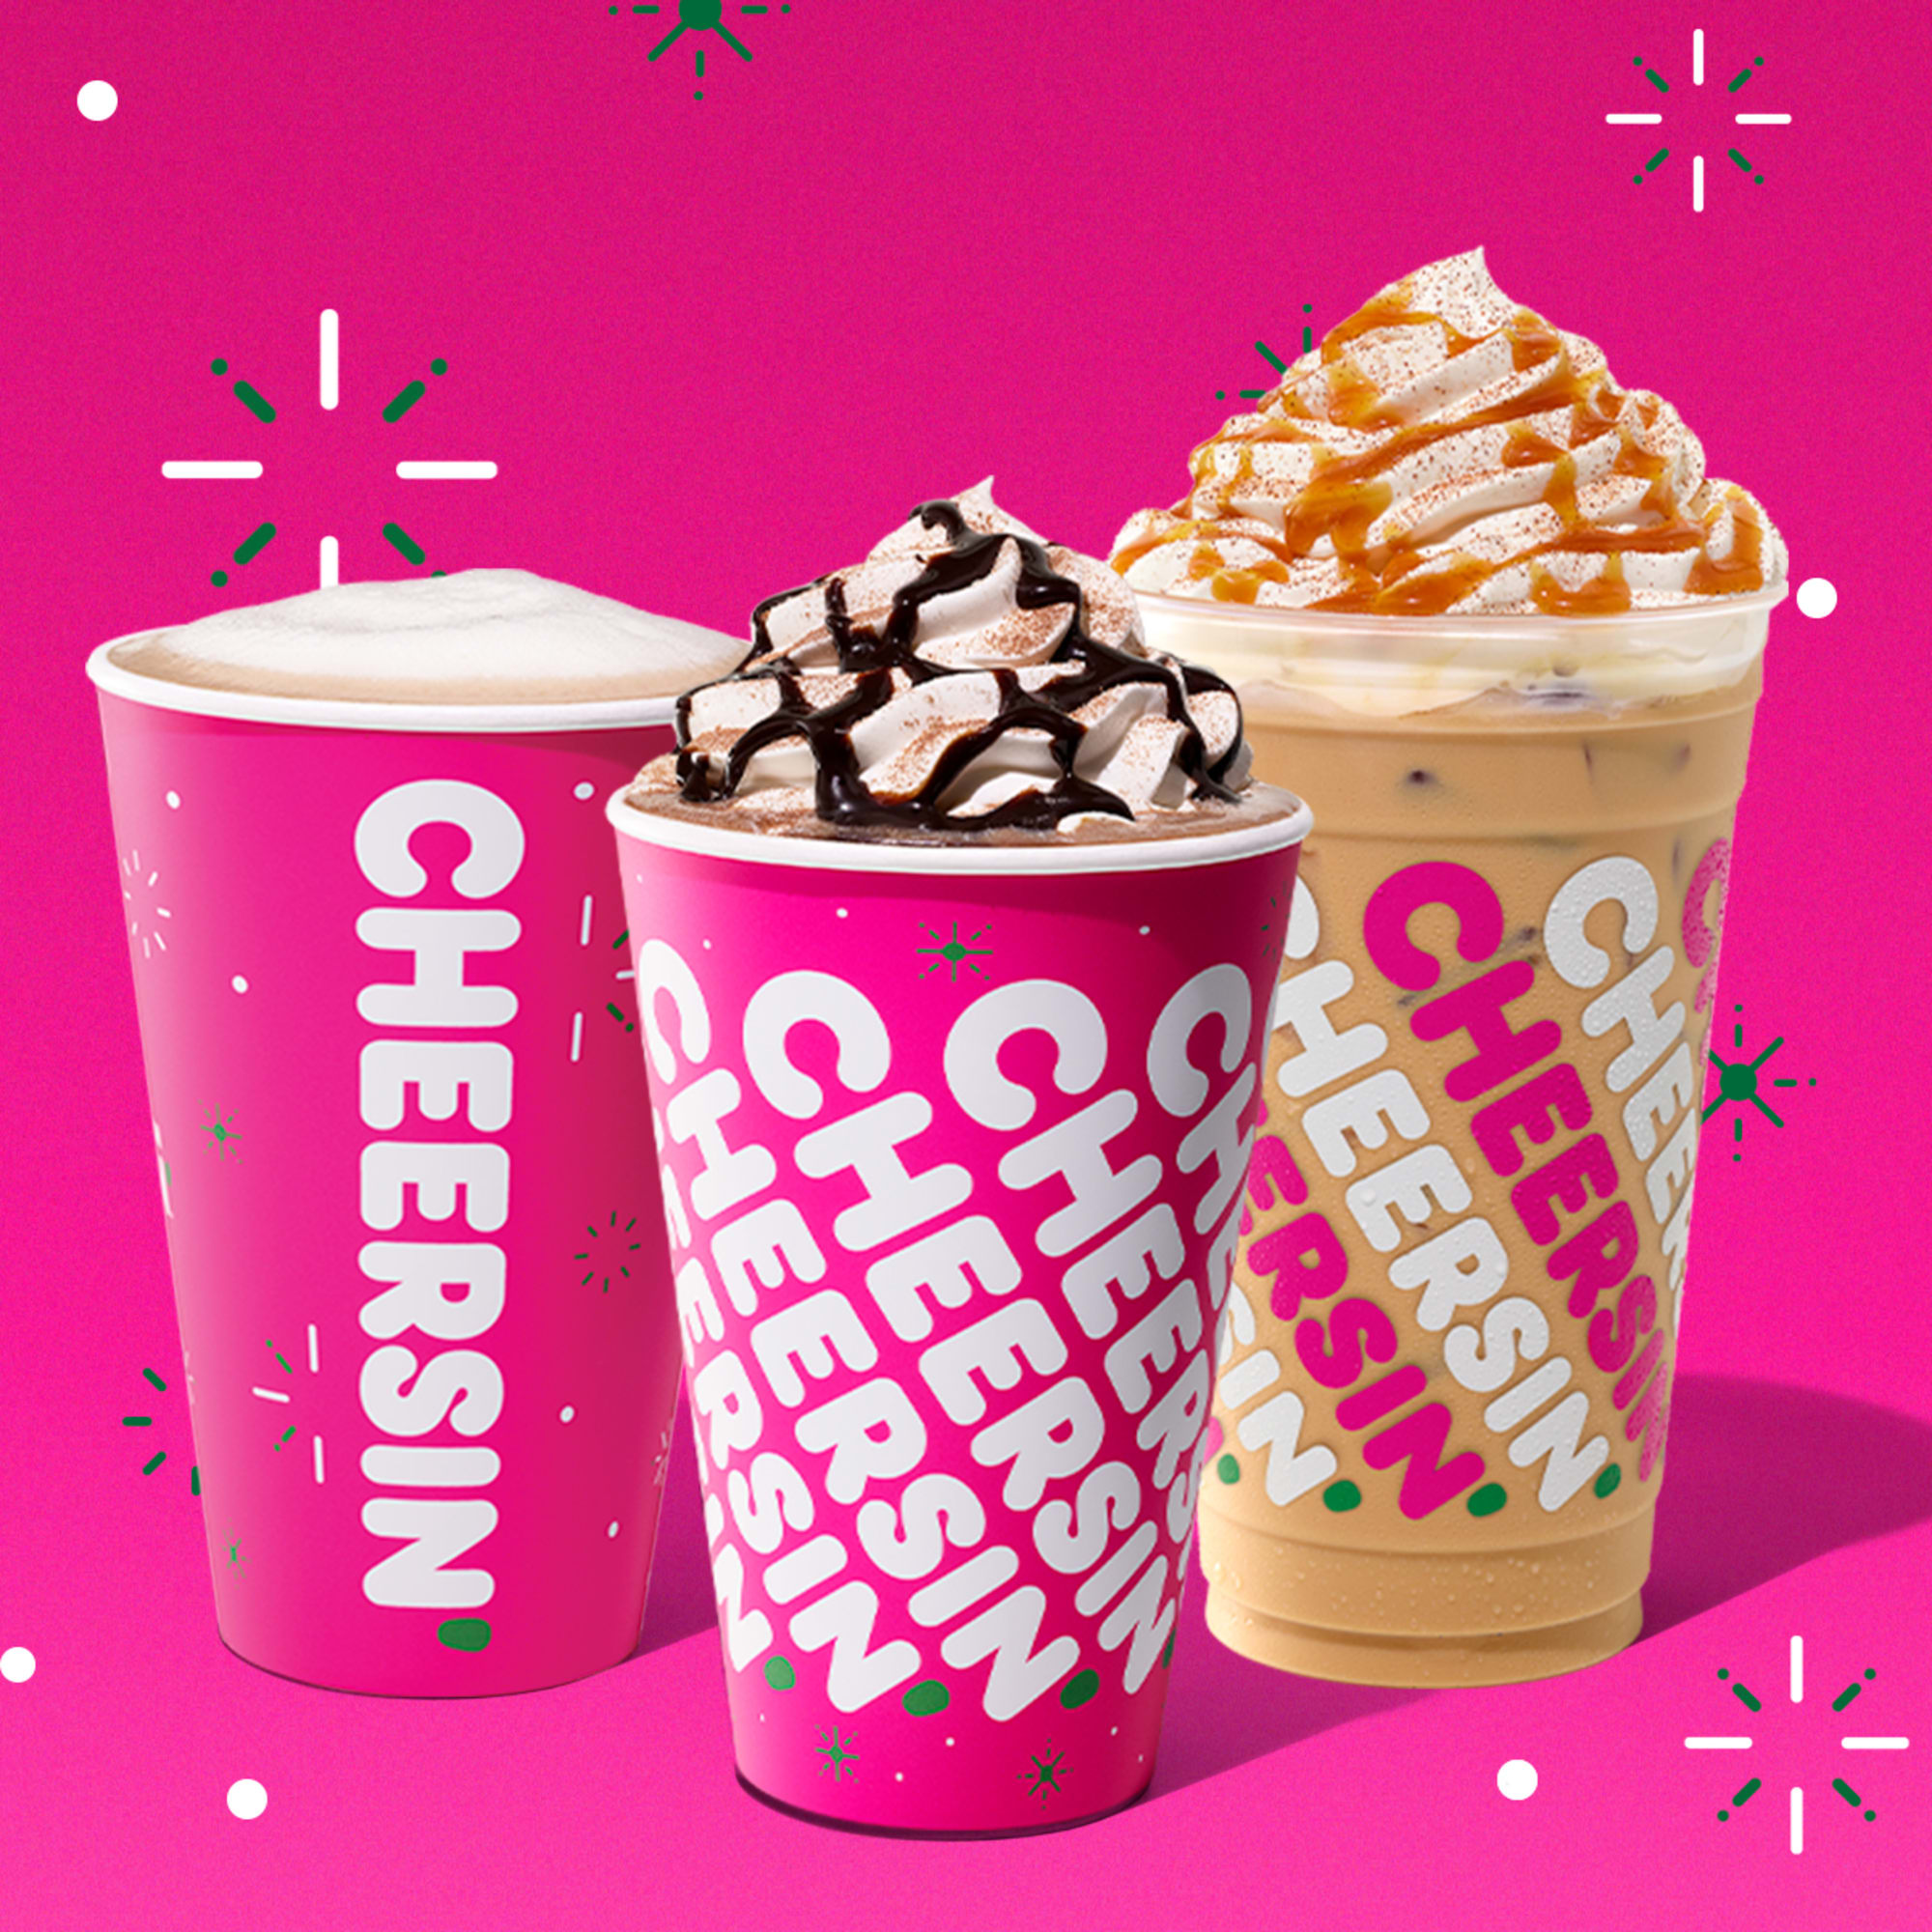 The Dunkin Donuts holiday menu is perfect for white chocolate lovers